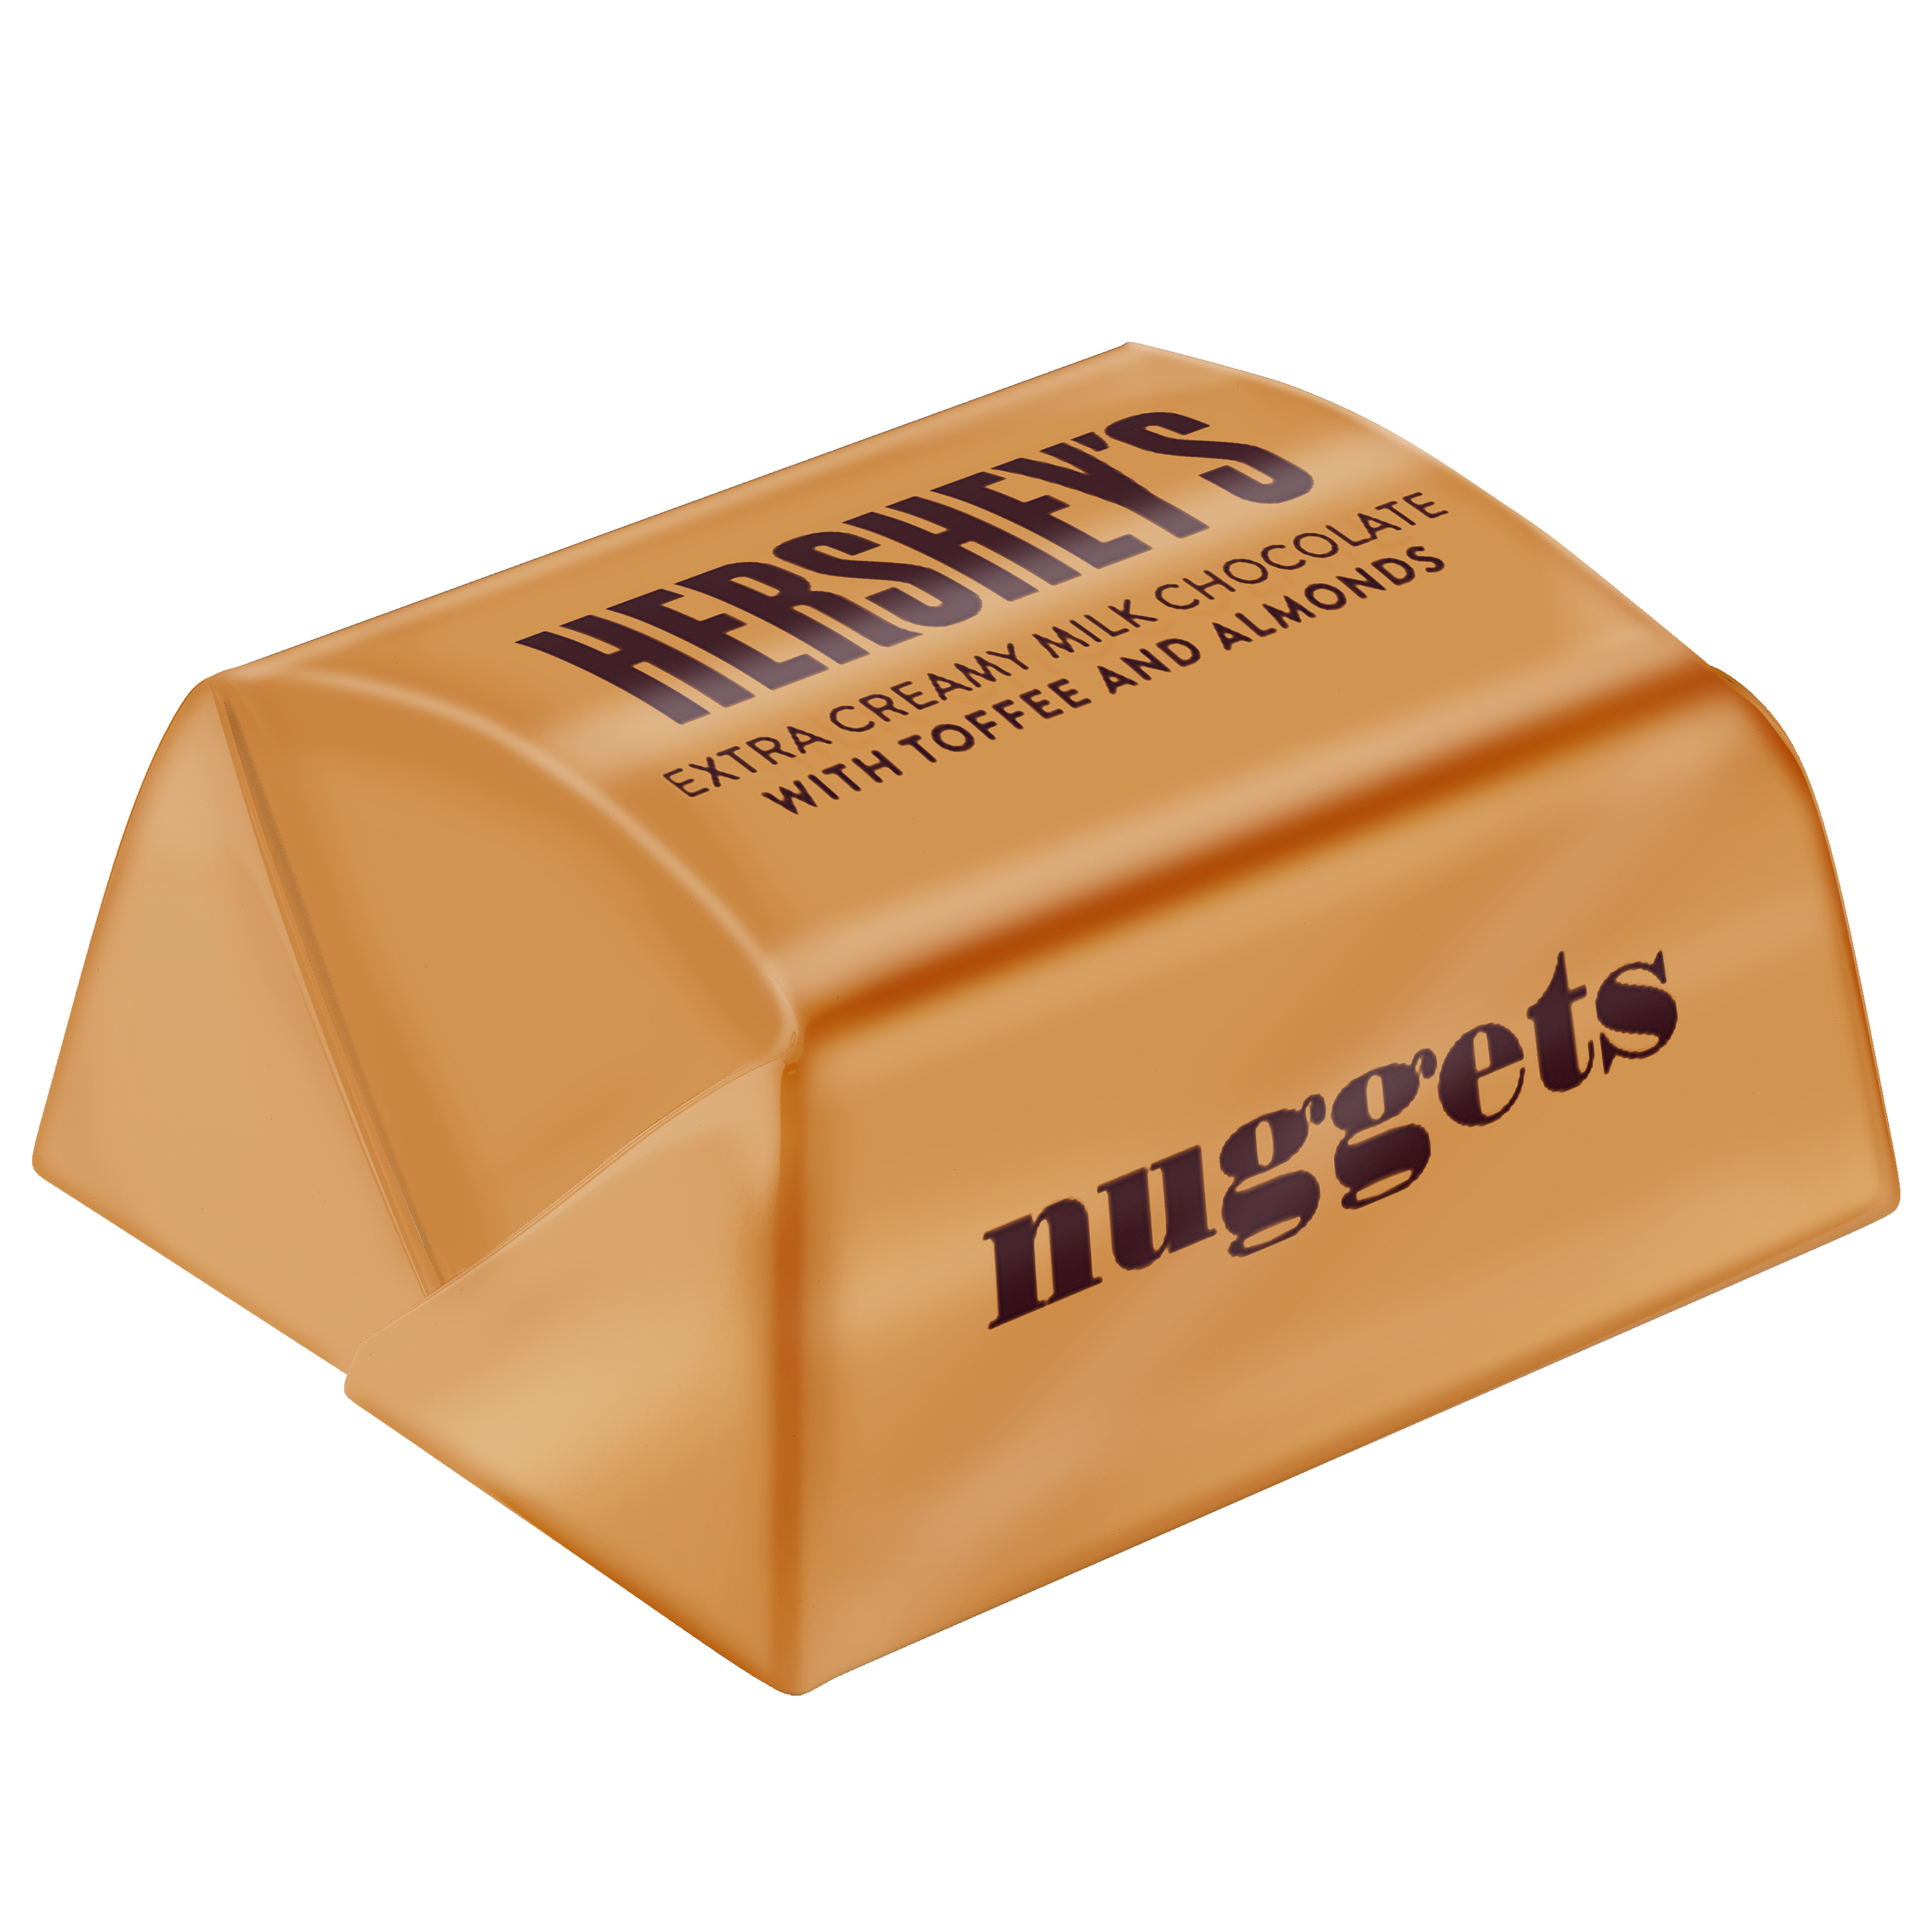 Hershey's Nuggets Milk Chocolate with Almonds, 15.8 Oz. - image 2 of 4